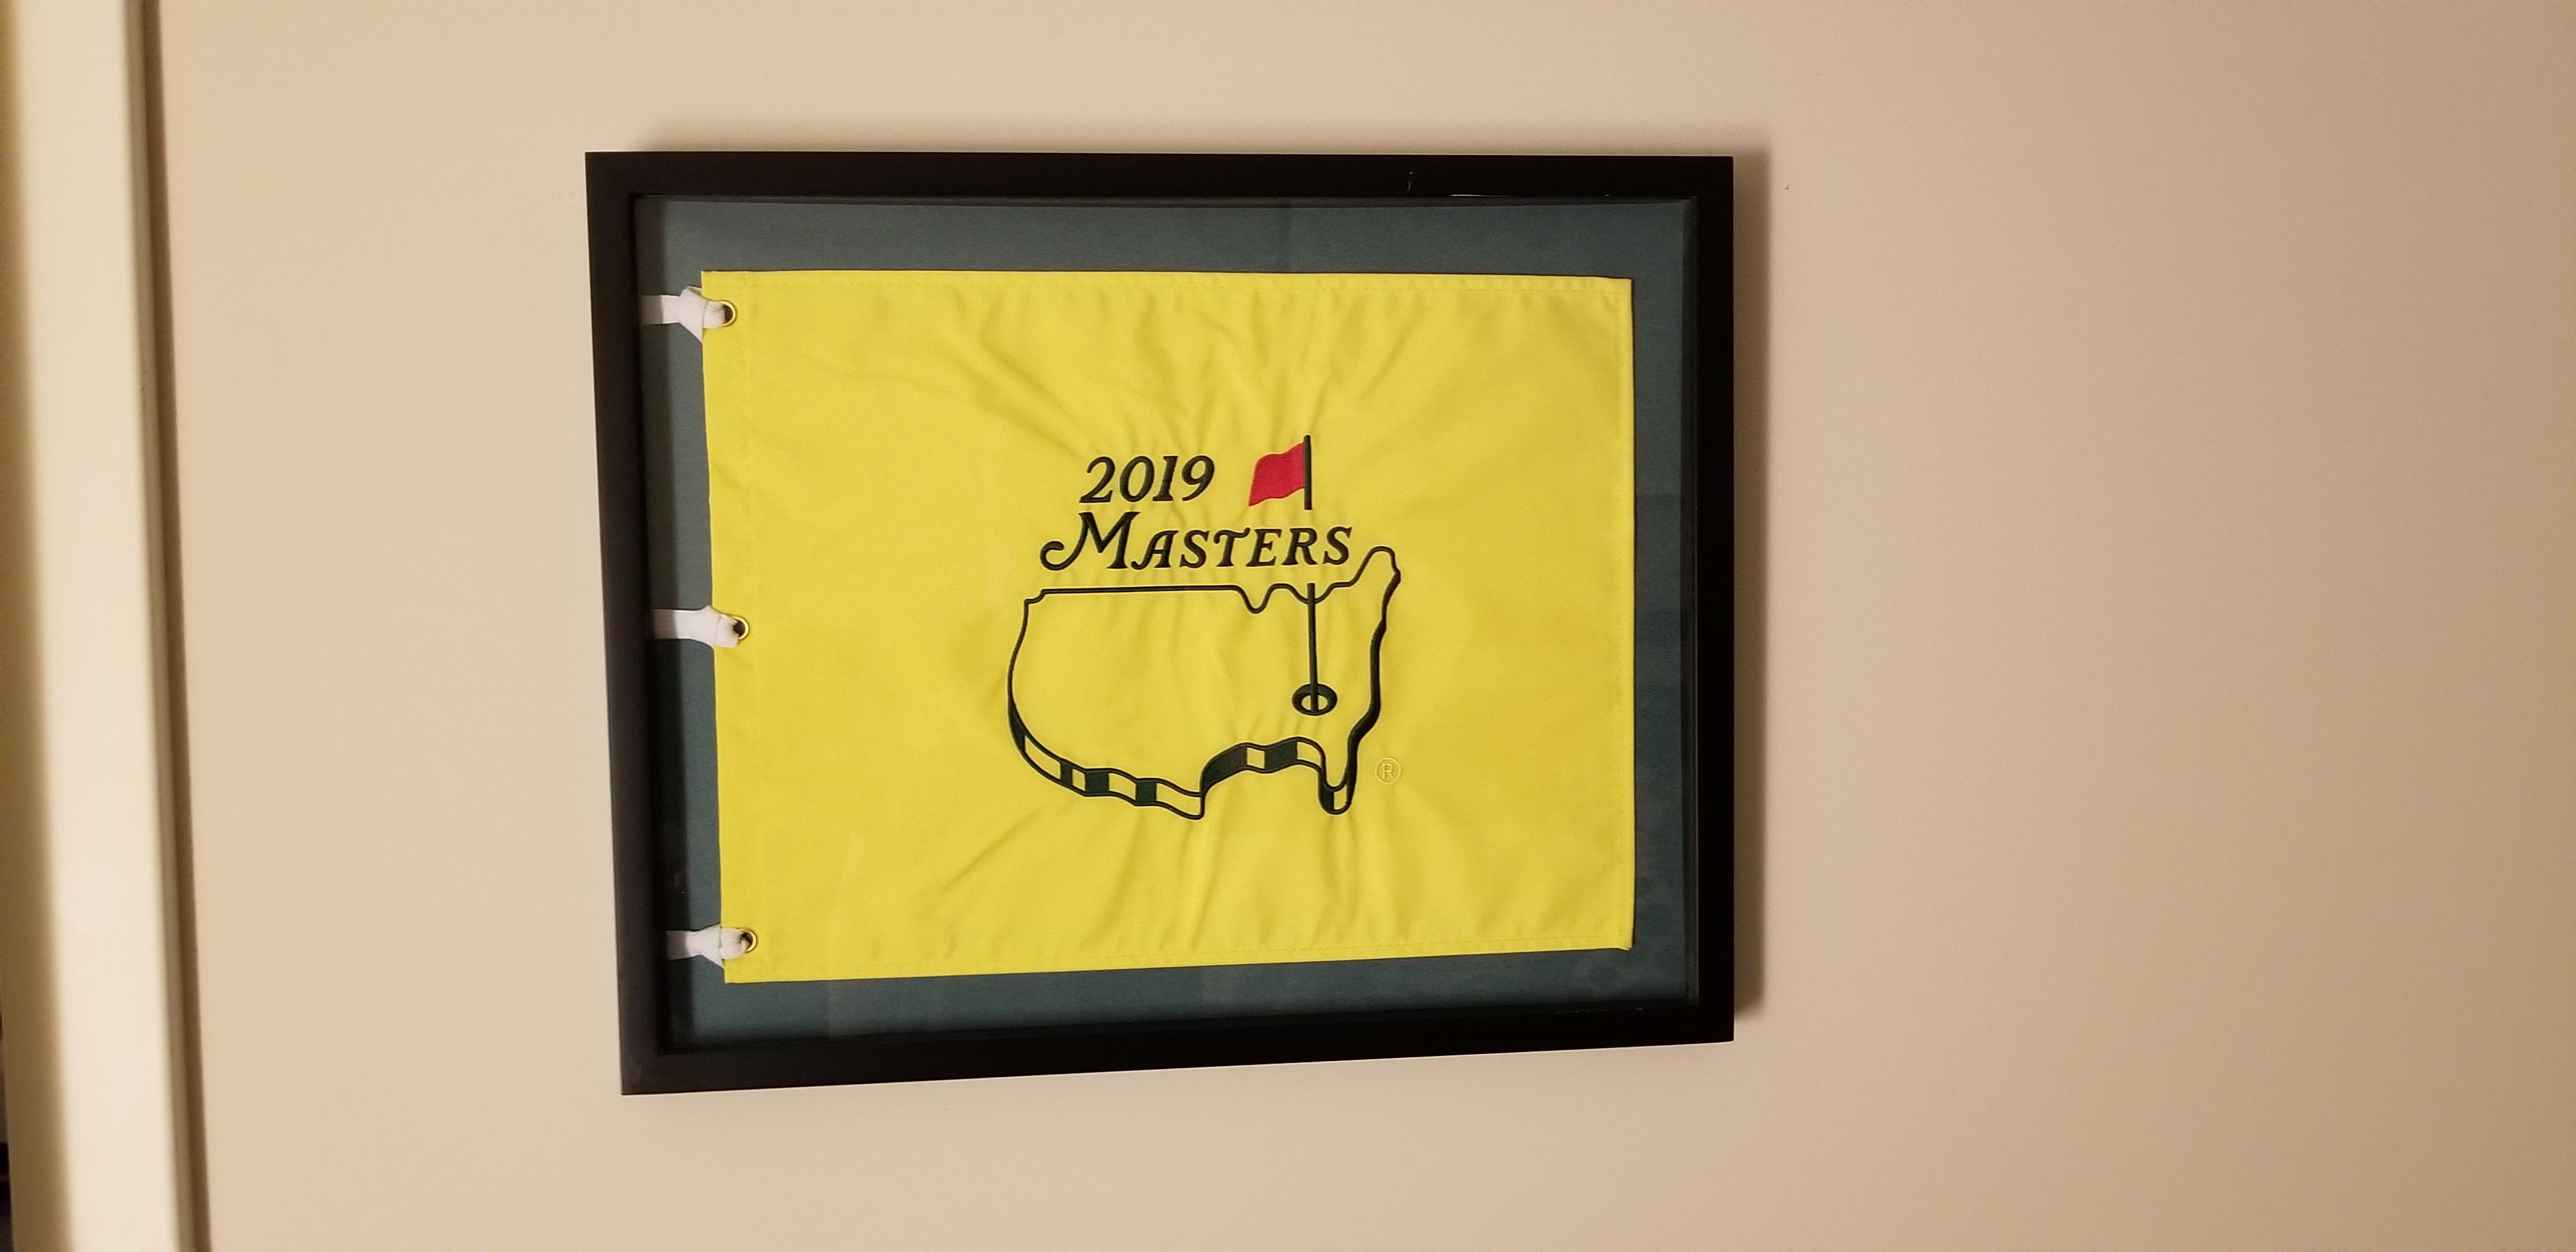 First pin flag I've ever purchased. The matting/framing was a pain to get right, but I think it turned out great.